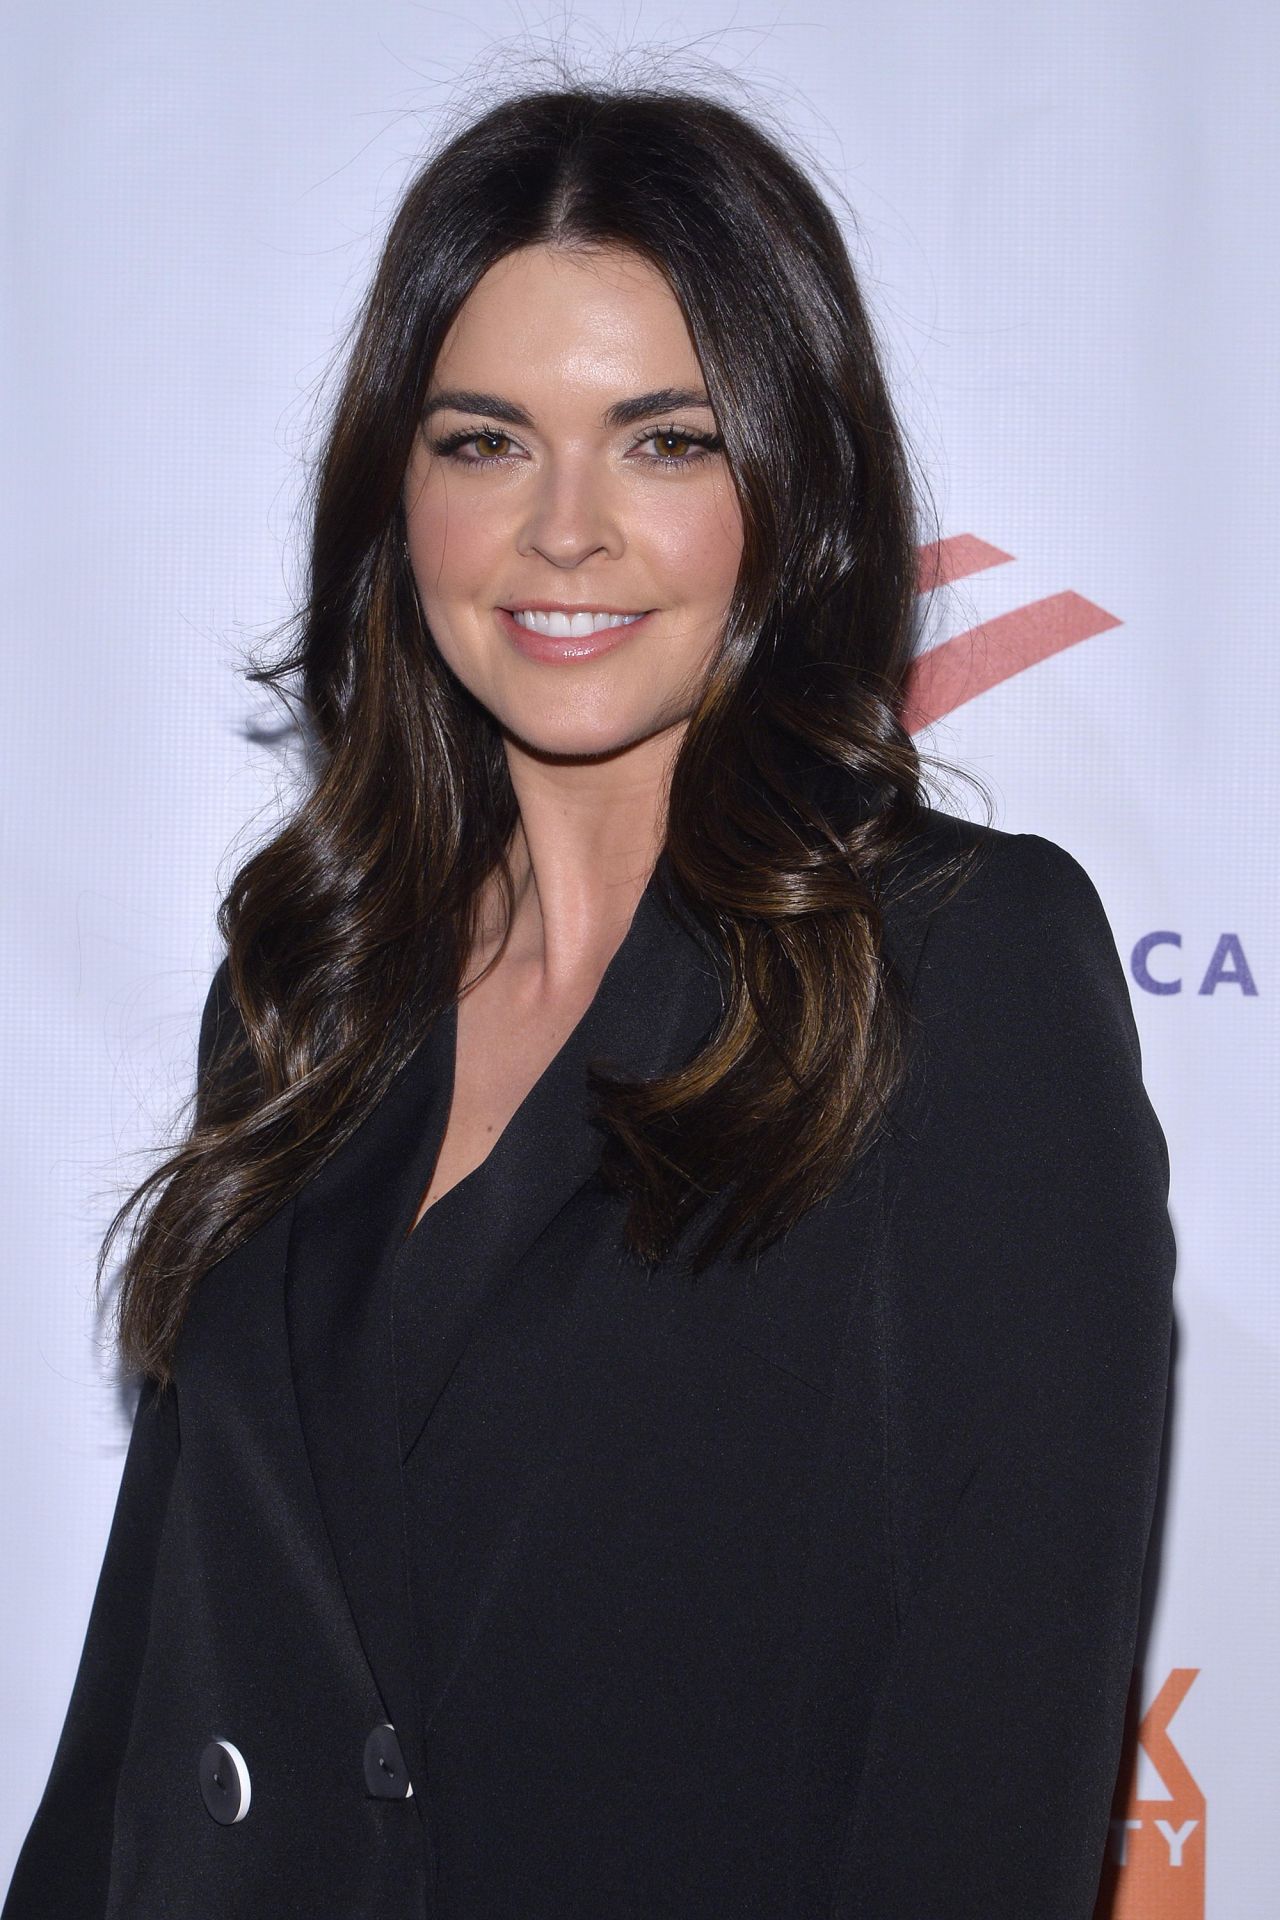 Katie Lee - 2019 Food Bank Can-Do Awards in NYC